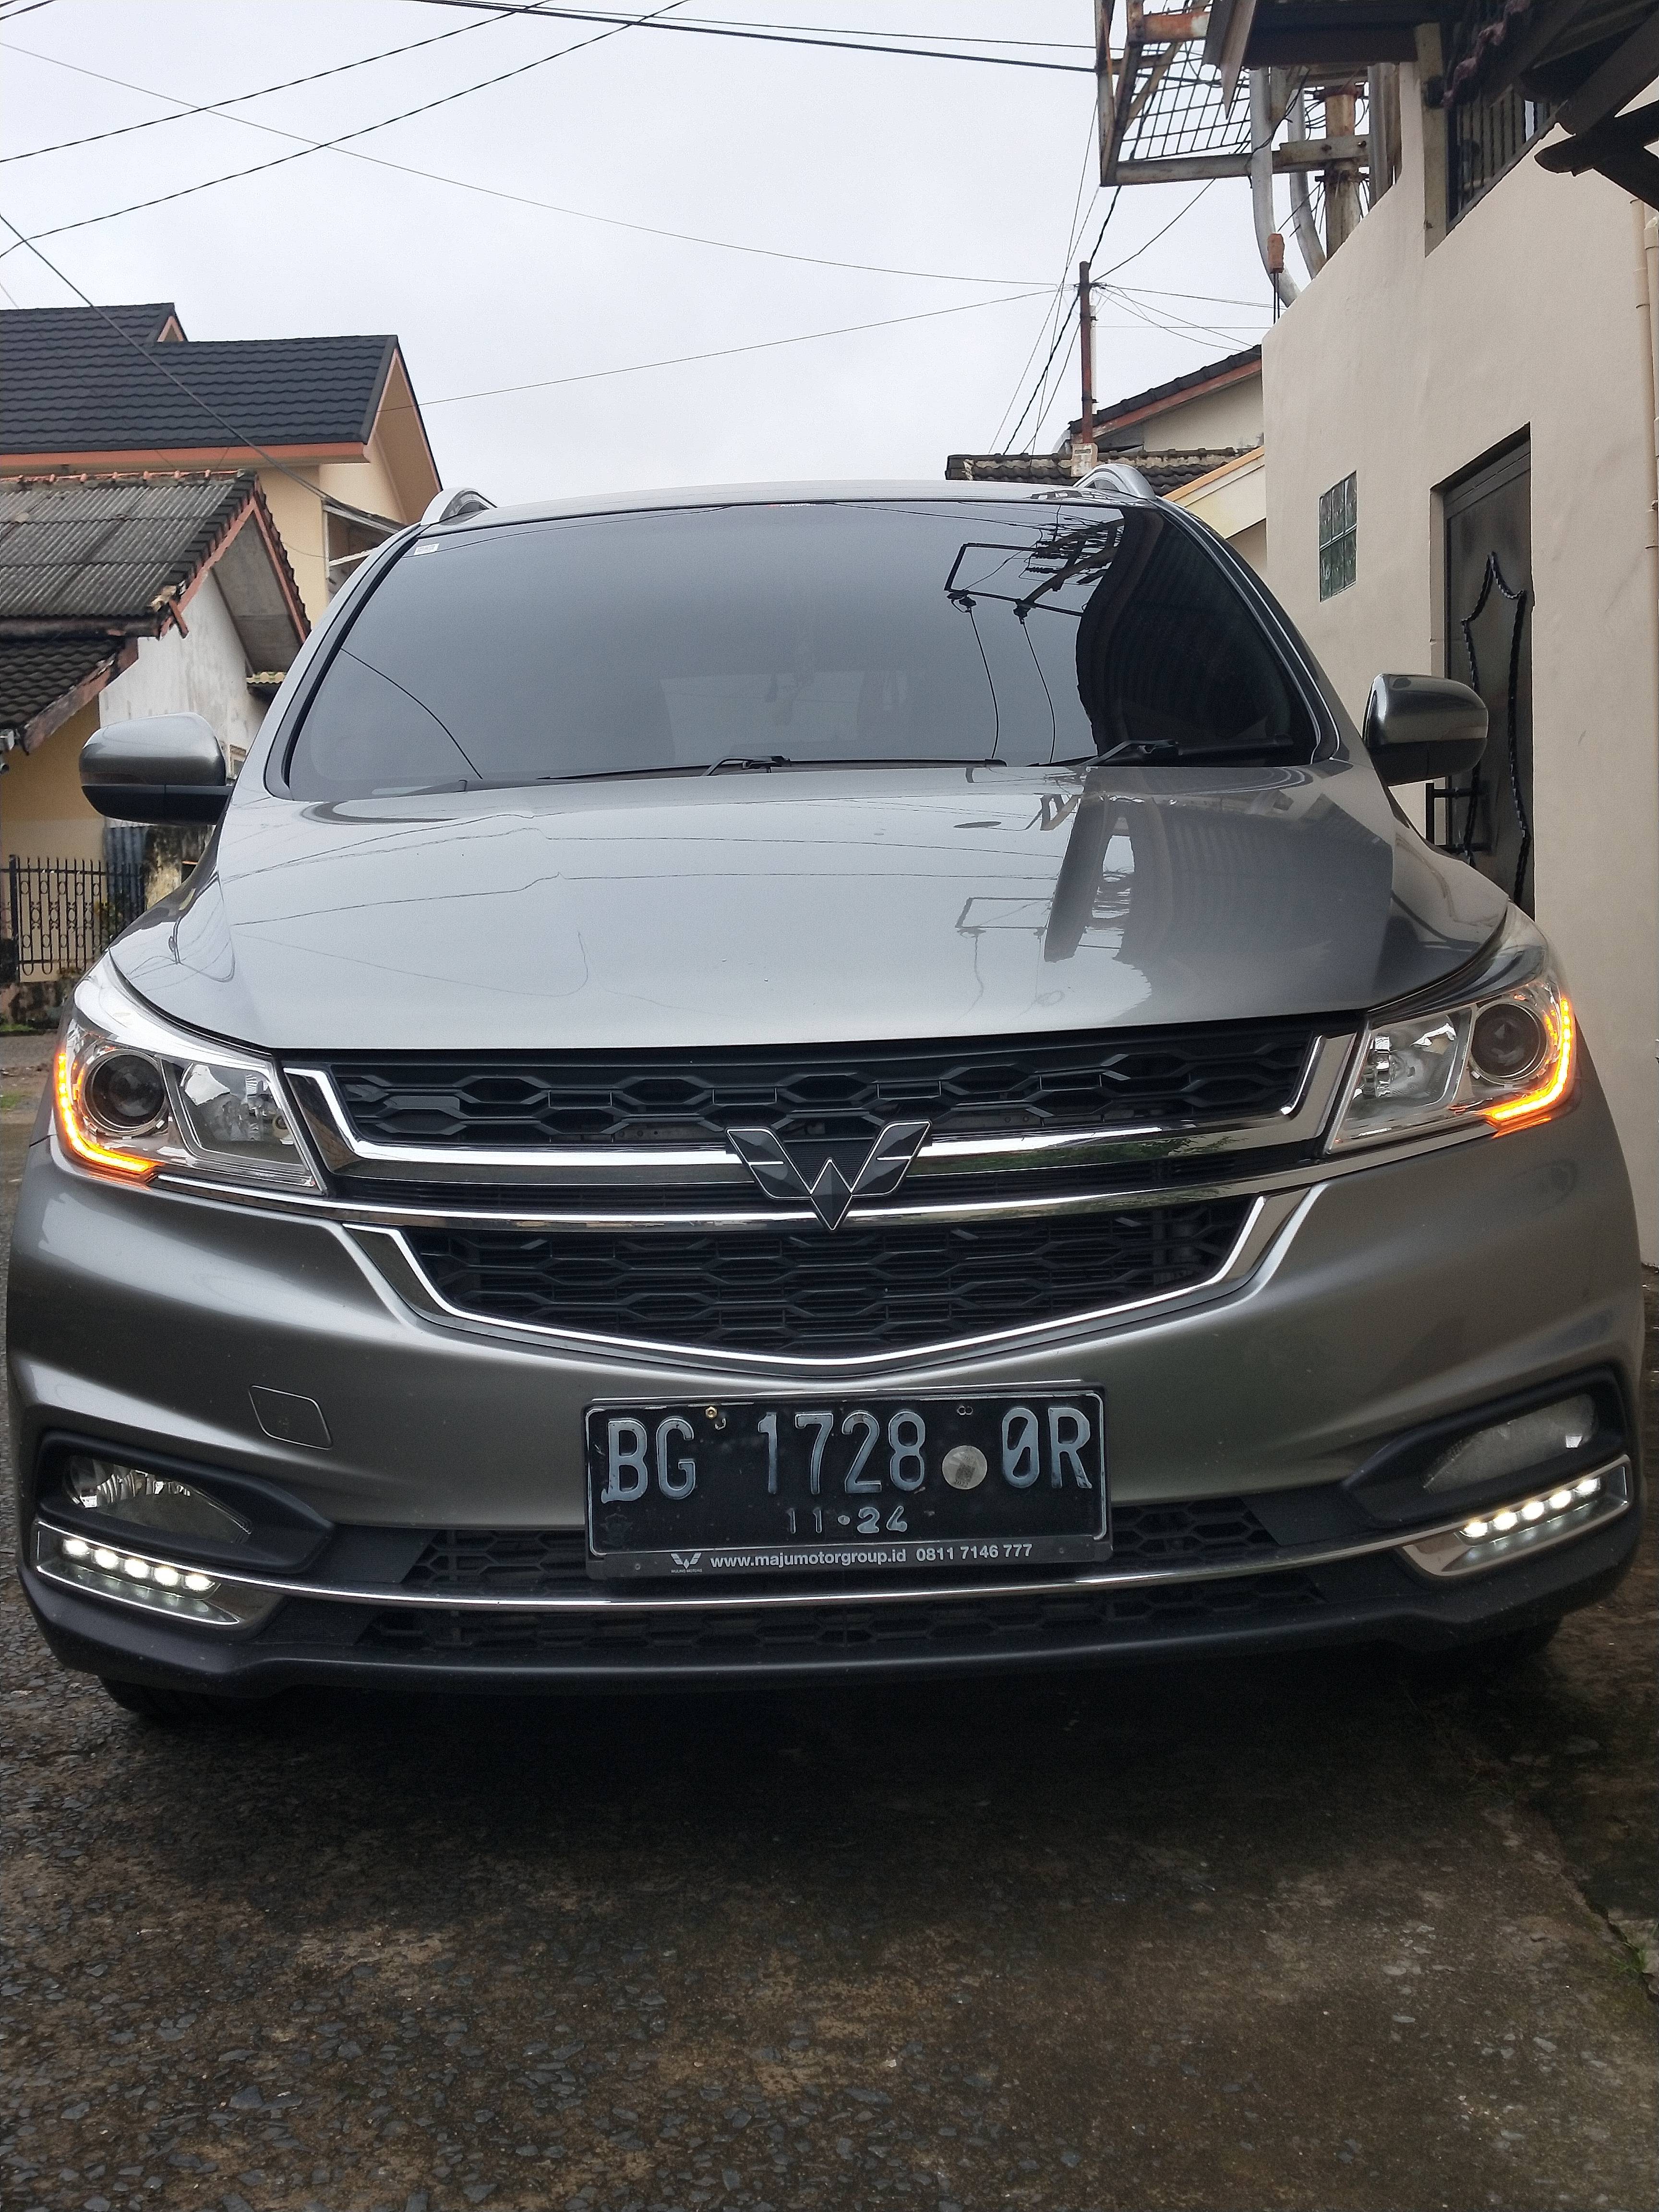 2019 Wuling Cortez 1.5 C TURBO AT LUX 1.5 C TURBO AT LUX bekas